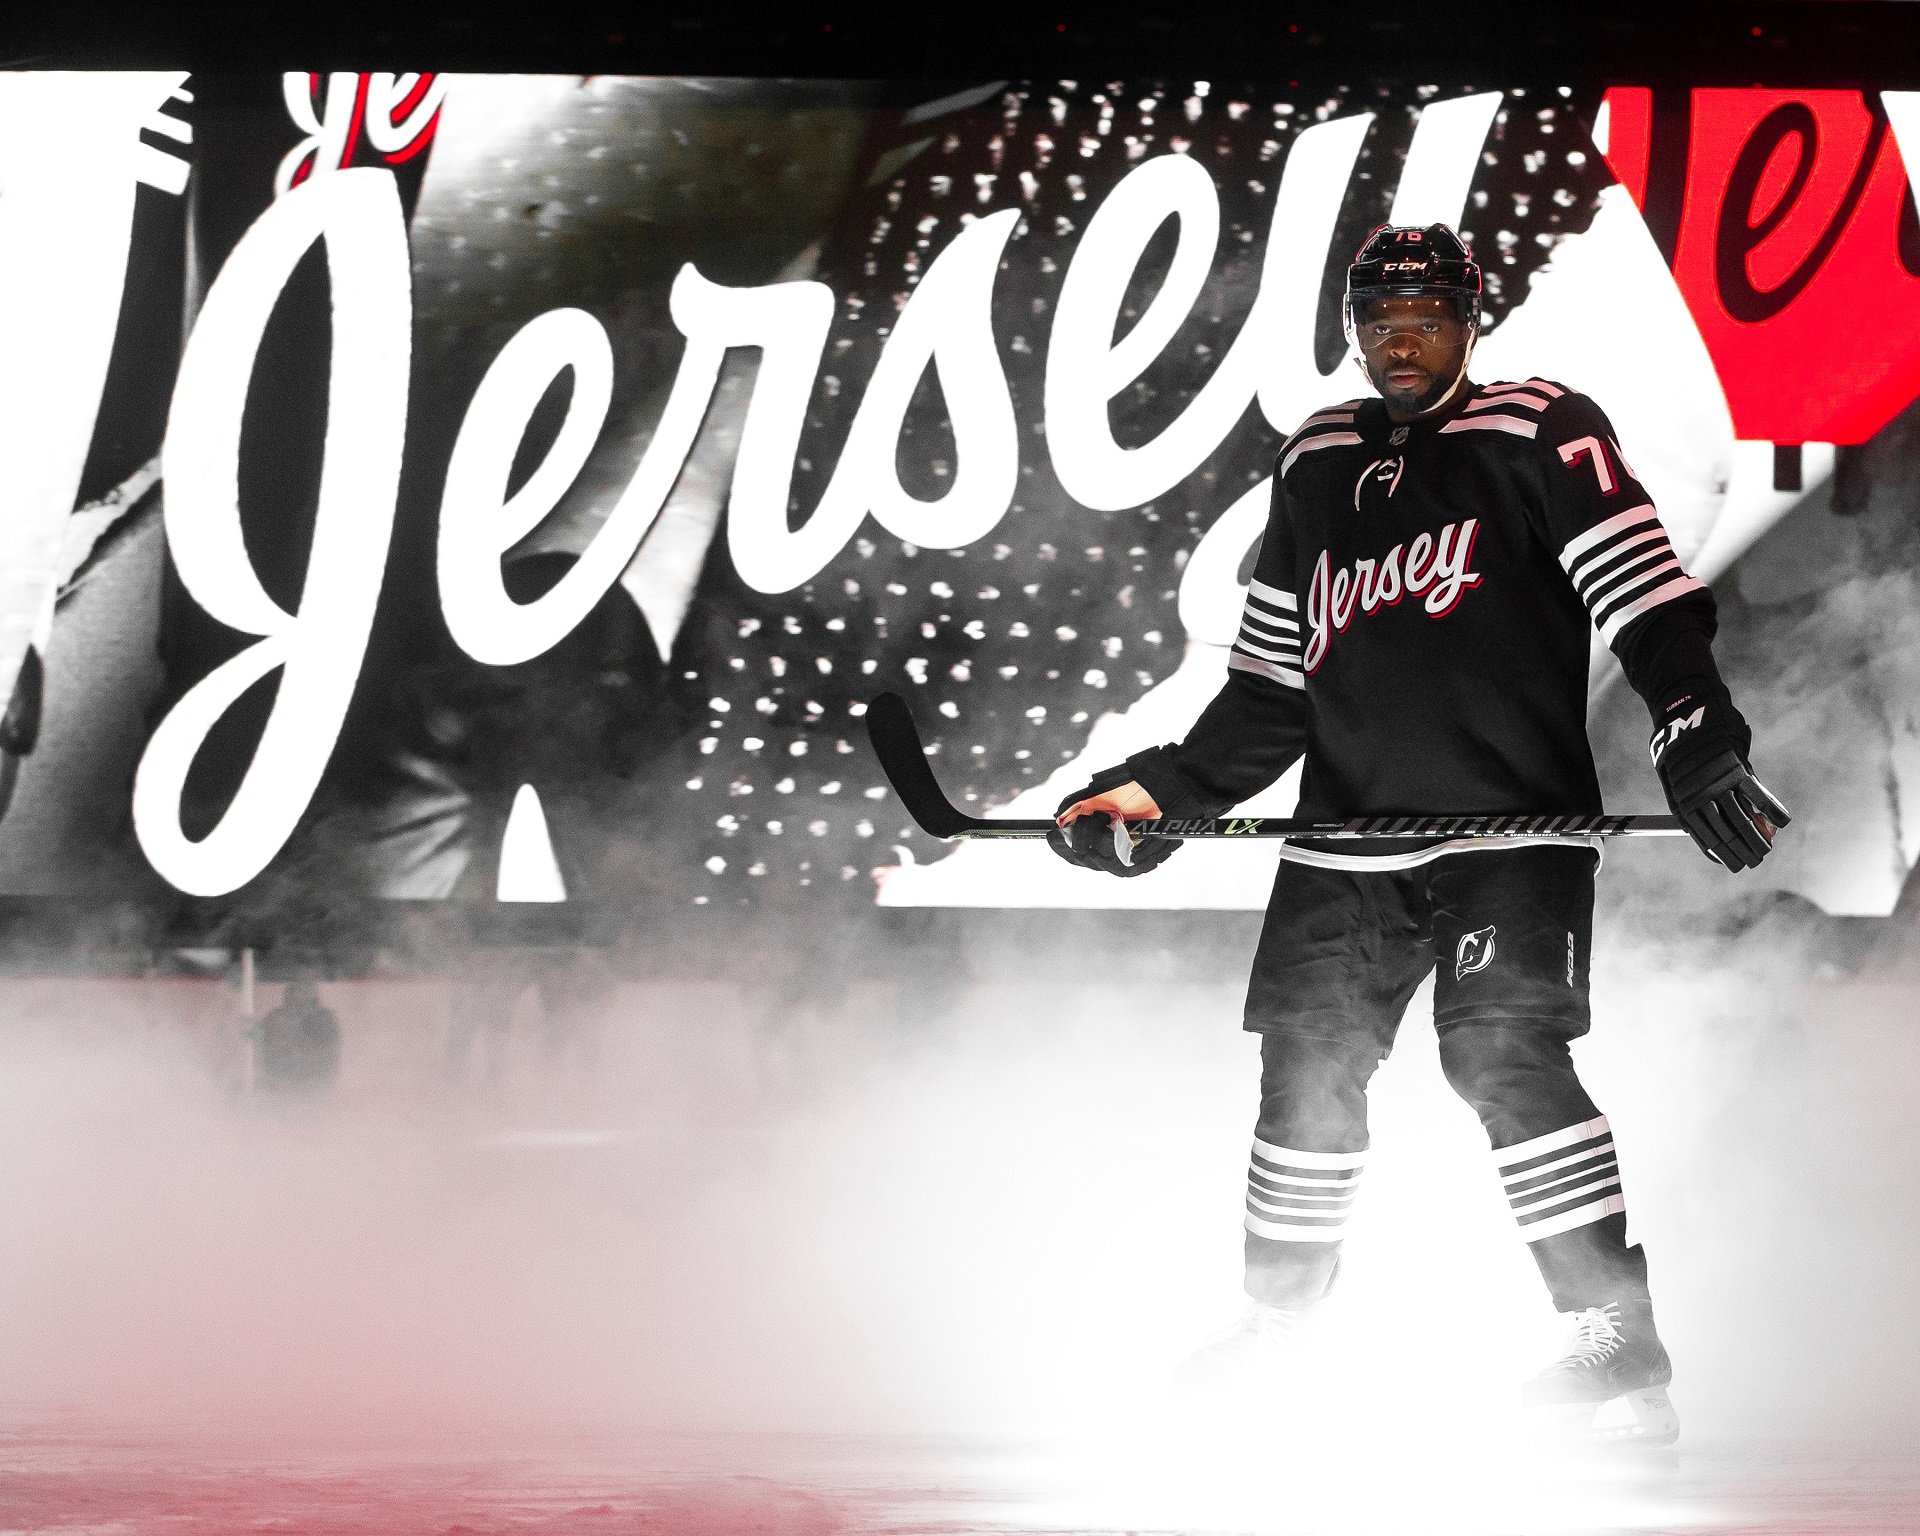 Devils unveil a third jersey, black with 'Jersey' on front